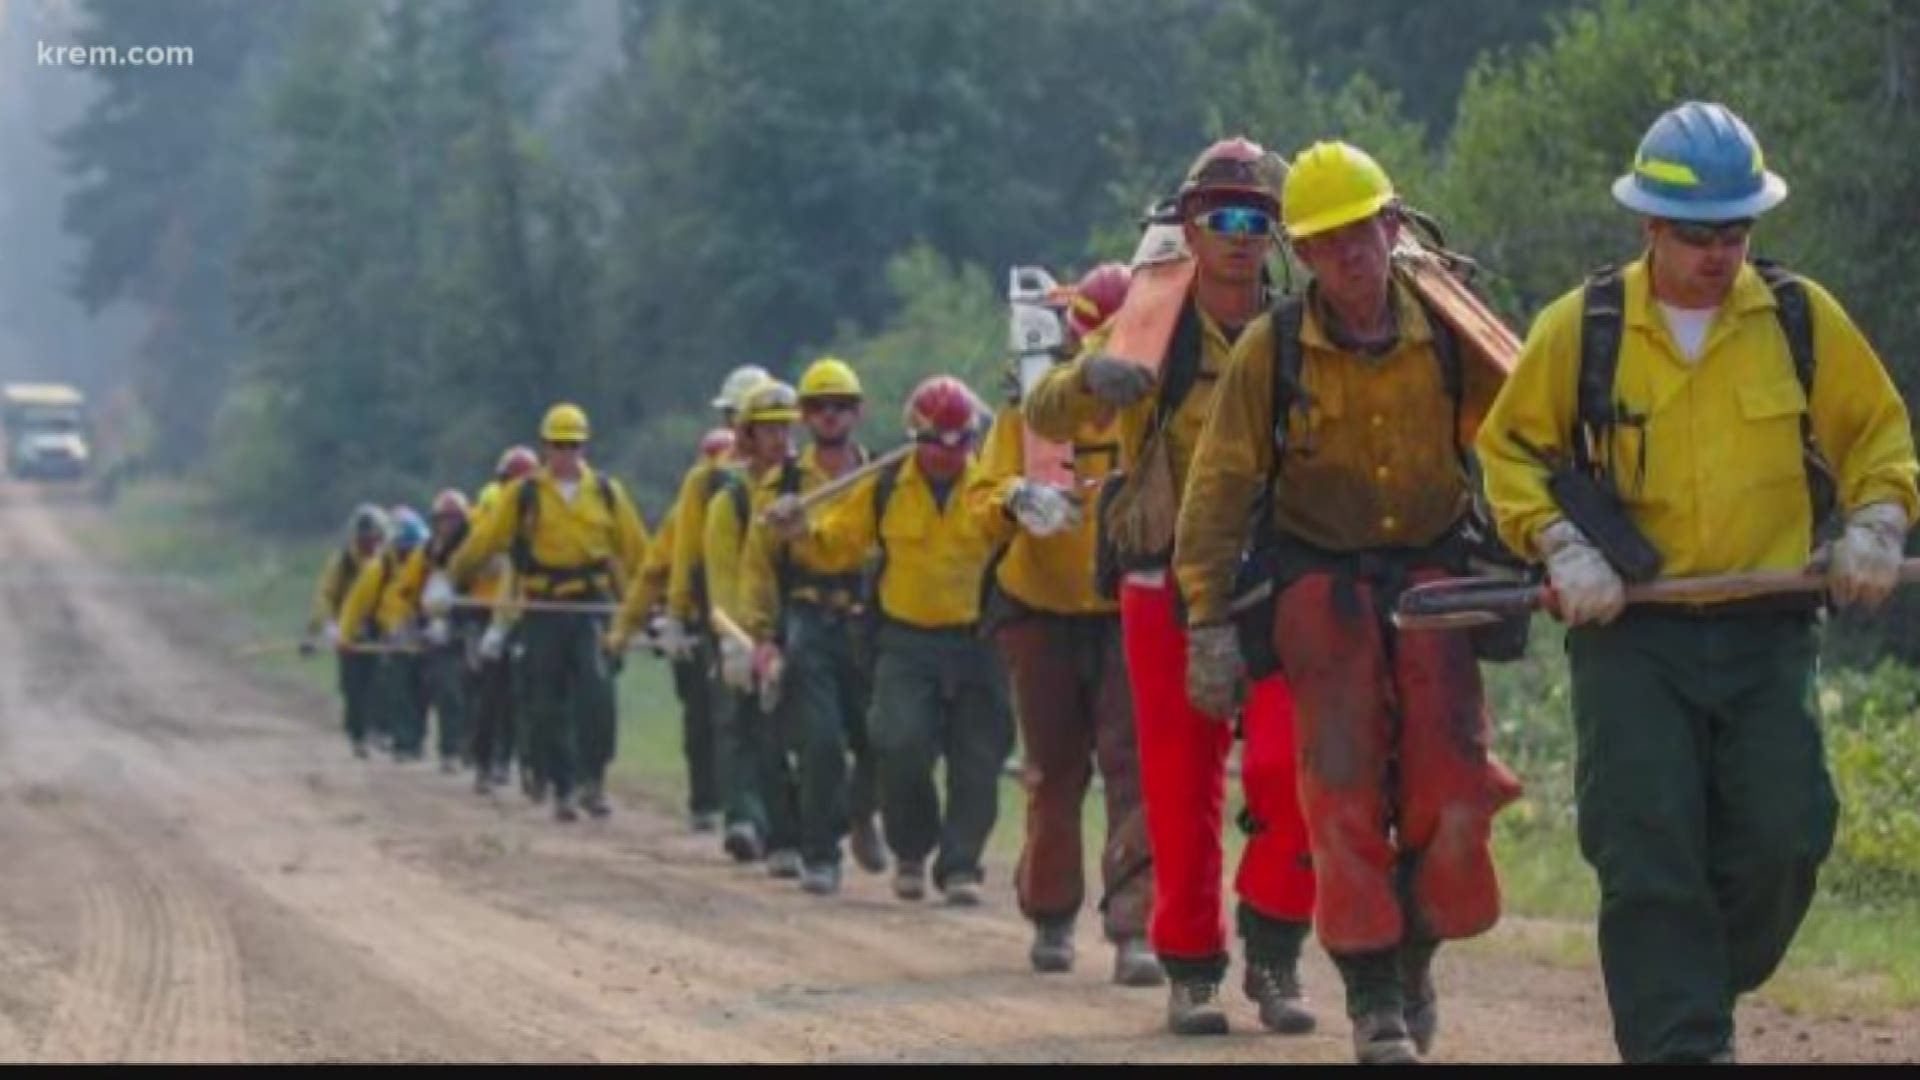 KREM's Brandon Jones spoke with fire crew leaders about how flash flooding hindered progress made on the Williams Flash Fire on the Colville Reservation.